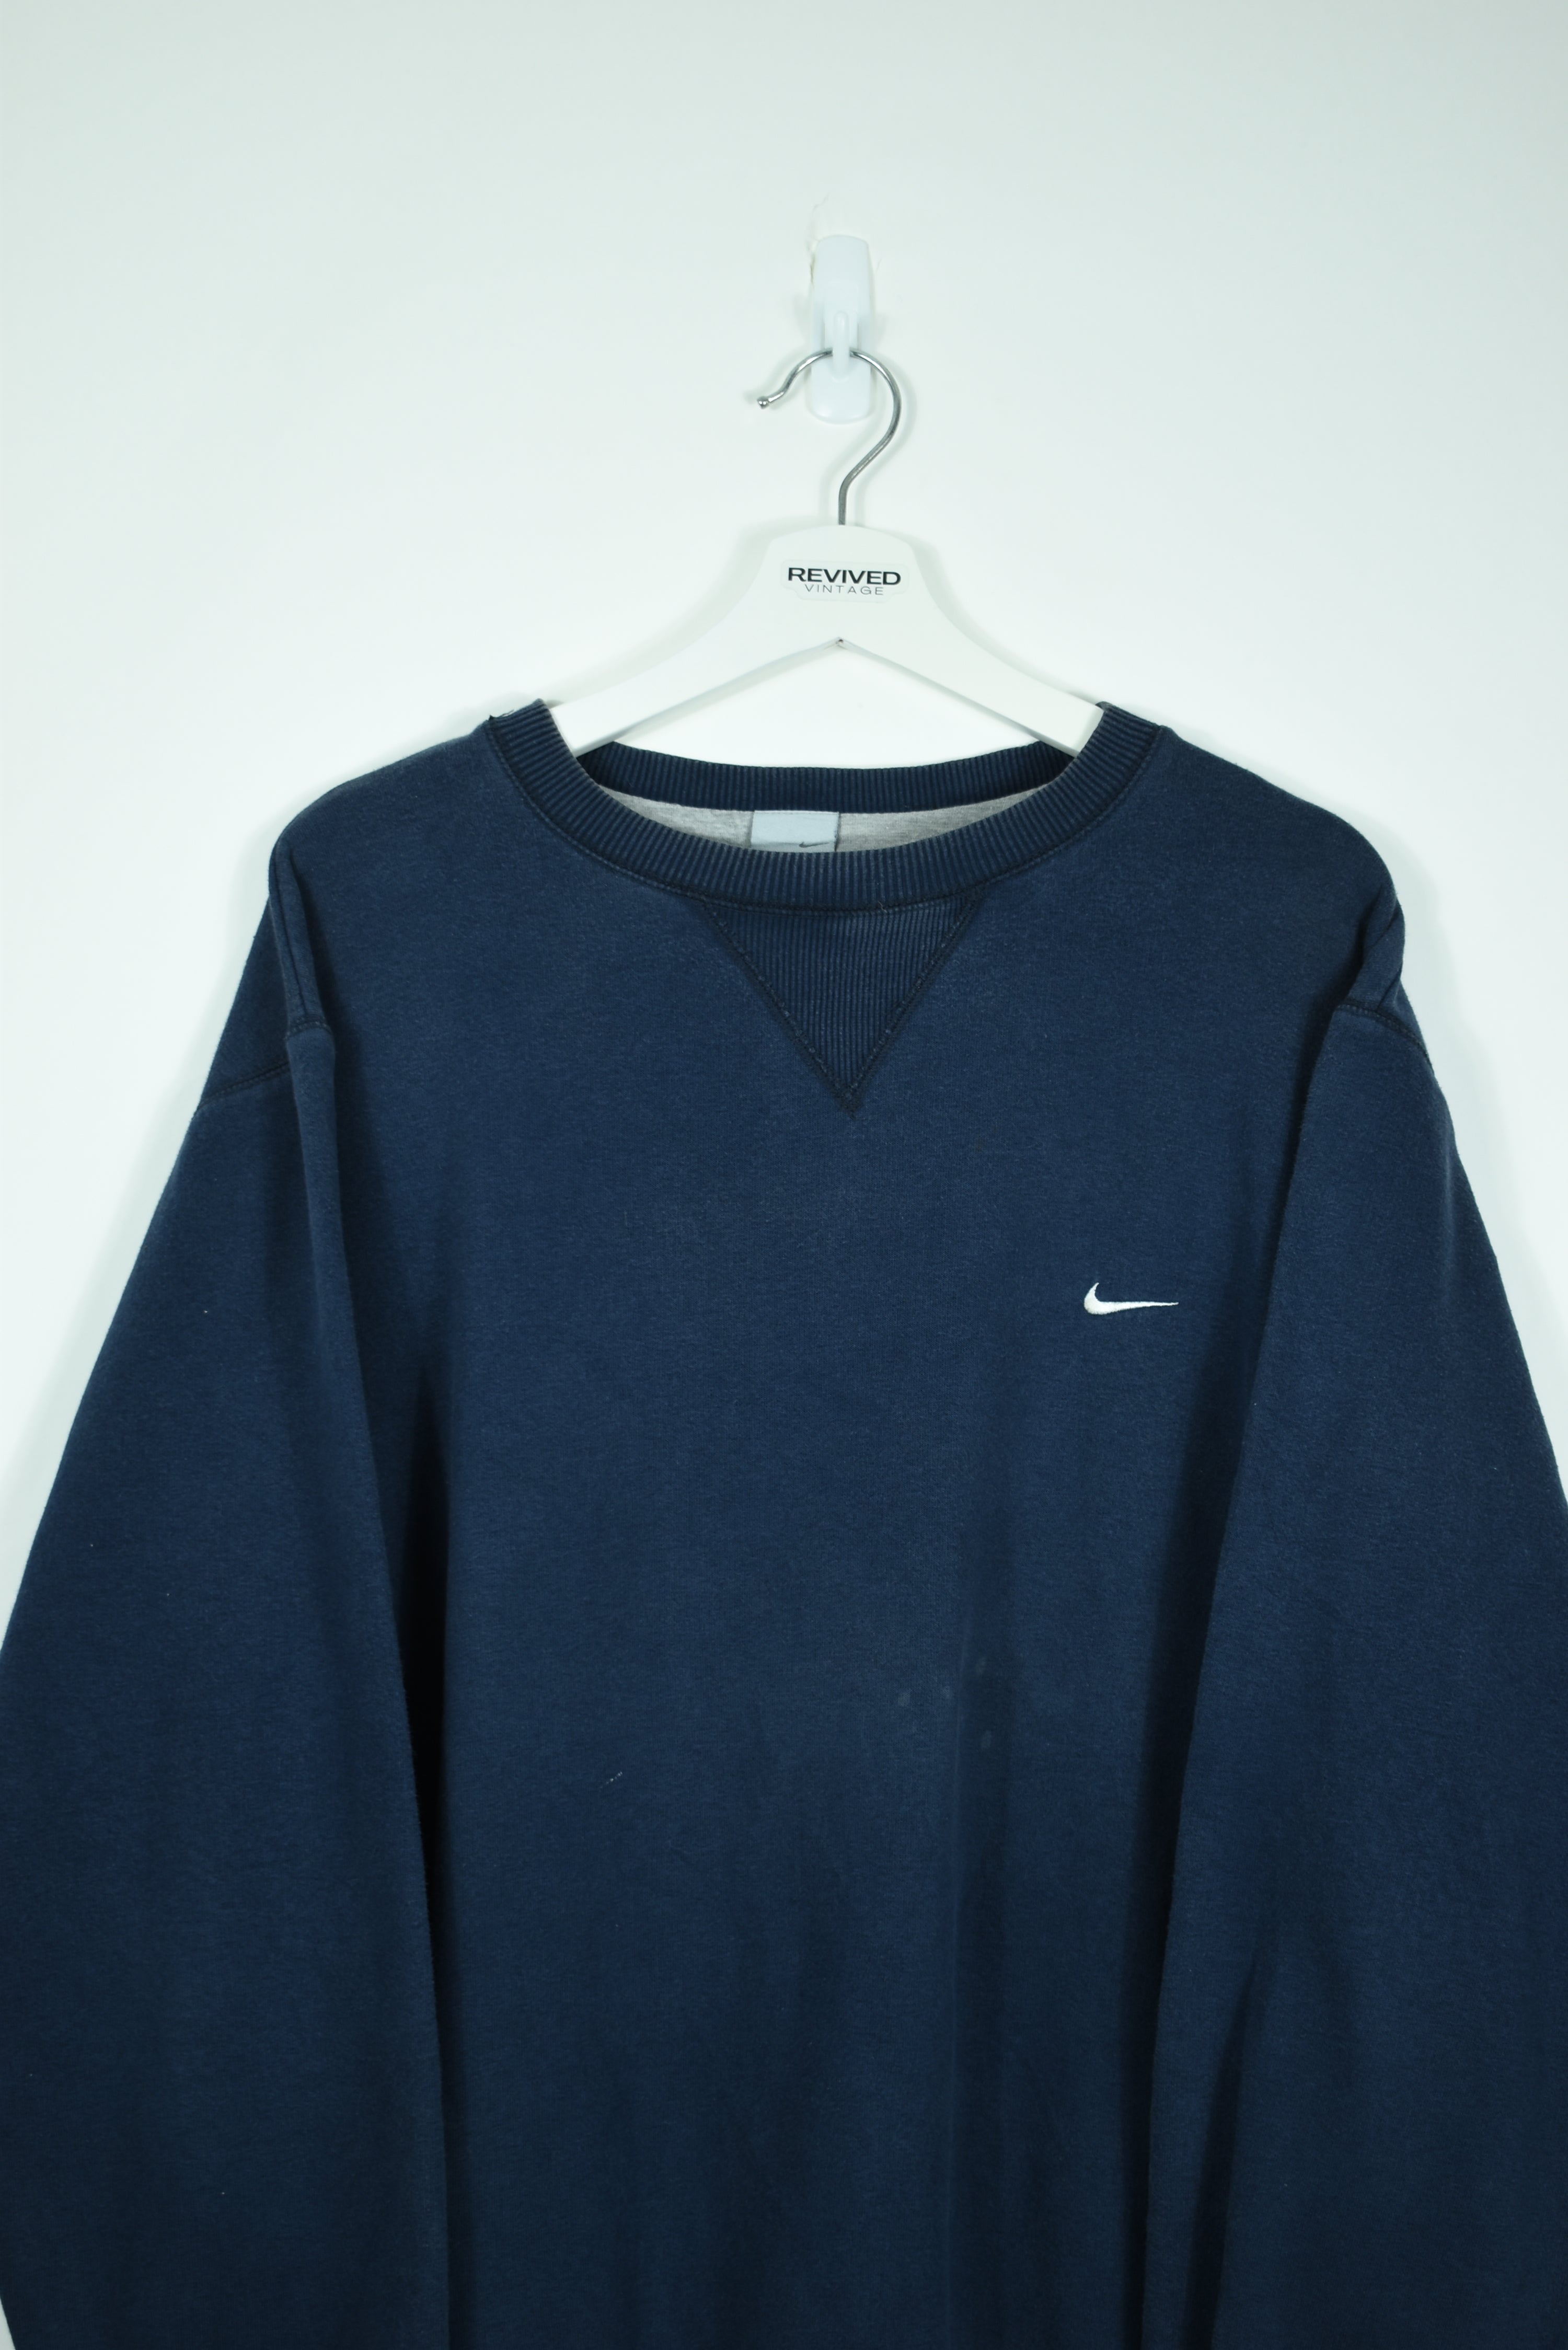 VINTAGE NIKE EMBROIDERY SMALL SWOOSH NAVY LARGE